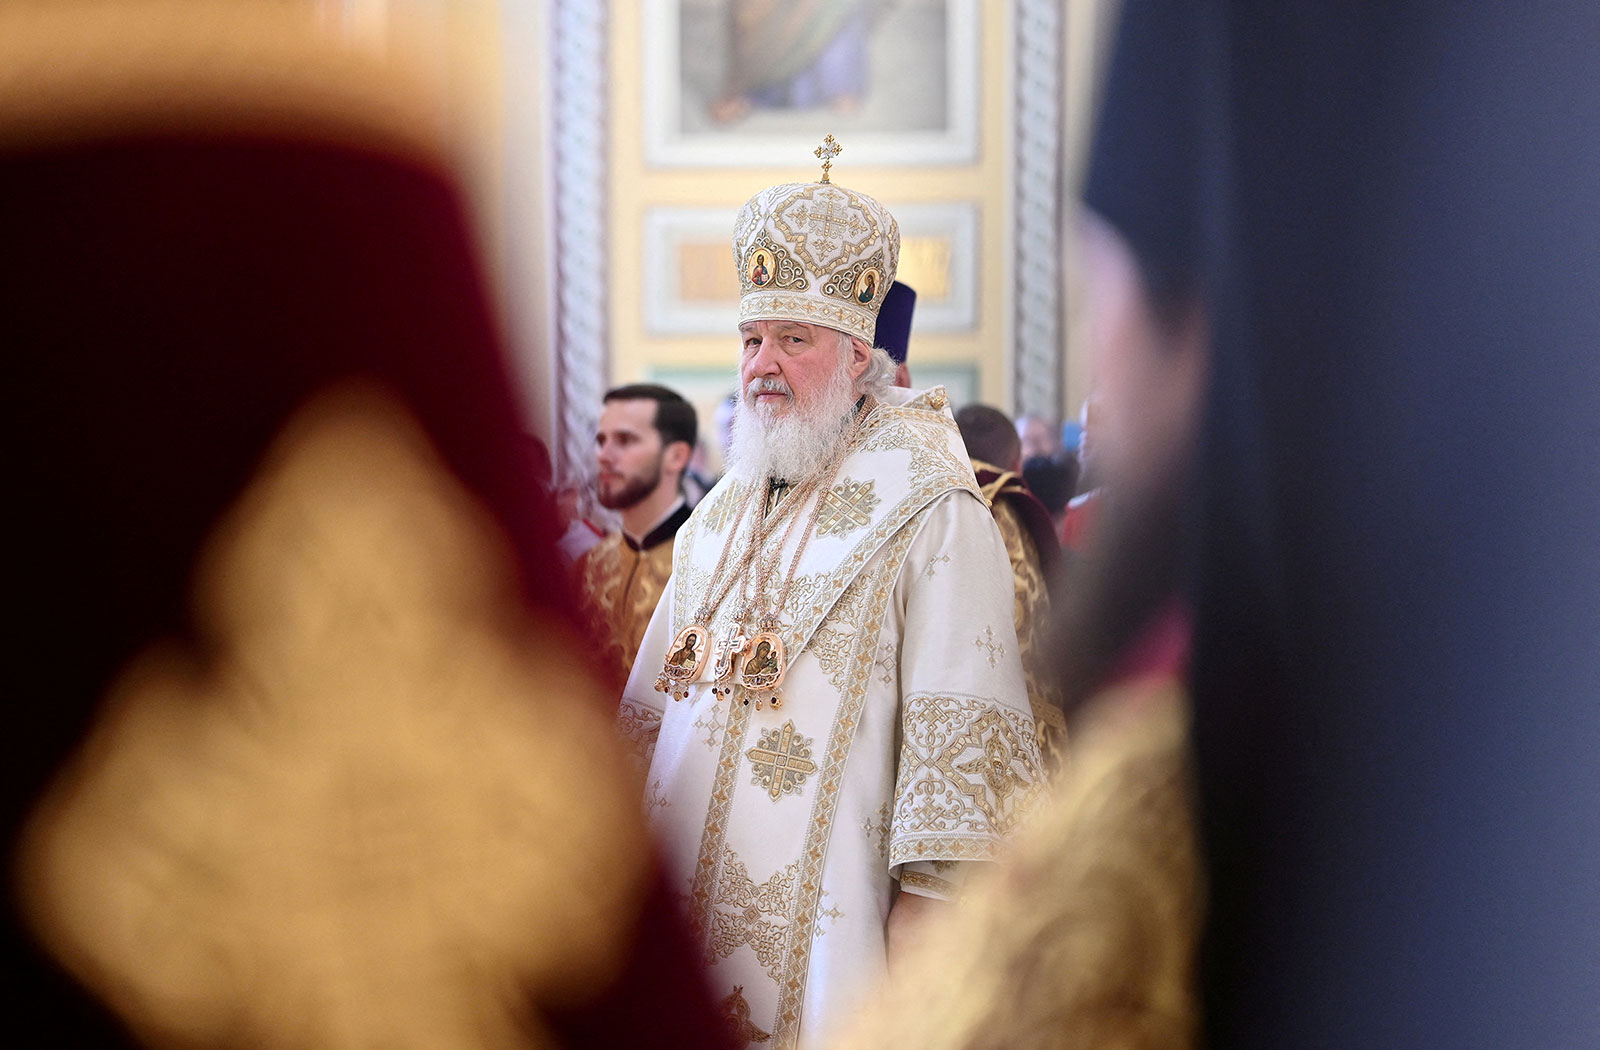 Russia's Patriarch Kirill conducts a service in Rostov-on-Don, Russia, on October 27, 2019.